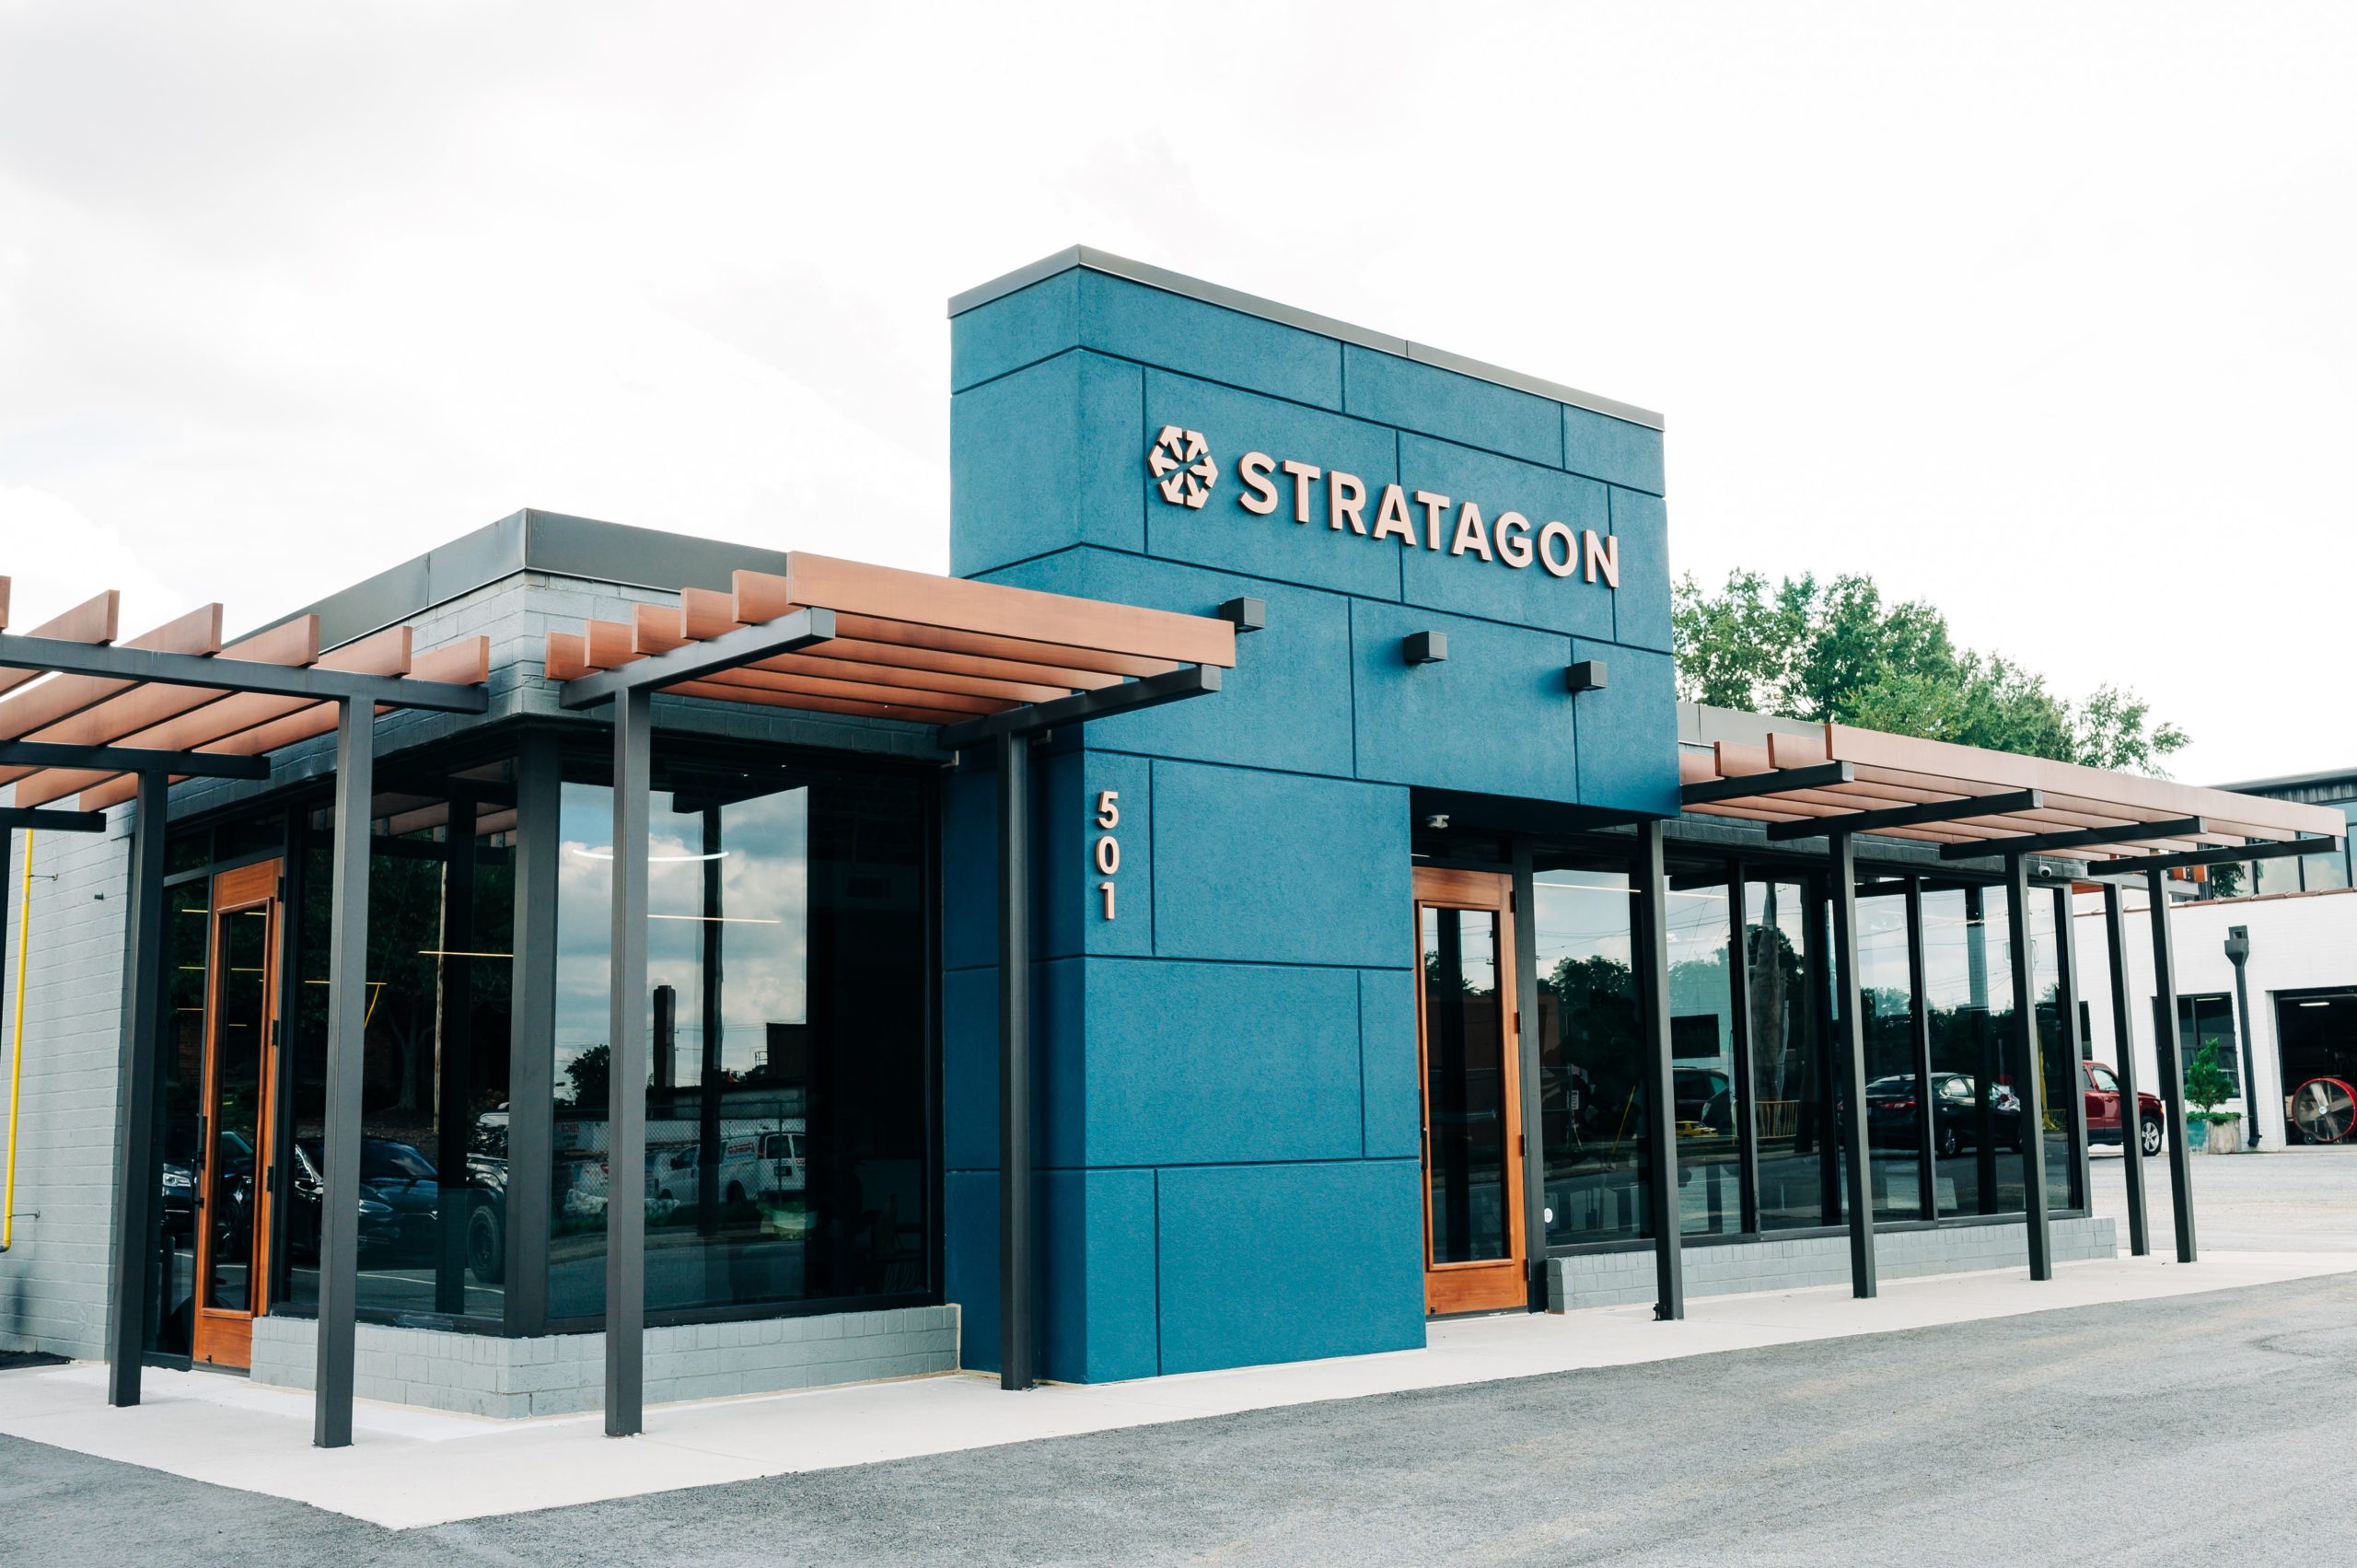 Stratagon, an integrated mareting agency in High Point, NC stands at 501 W. English Rd.